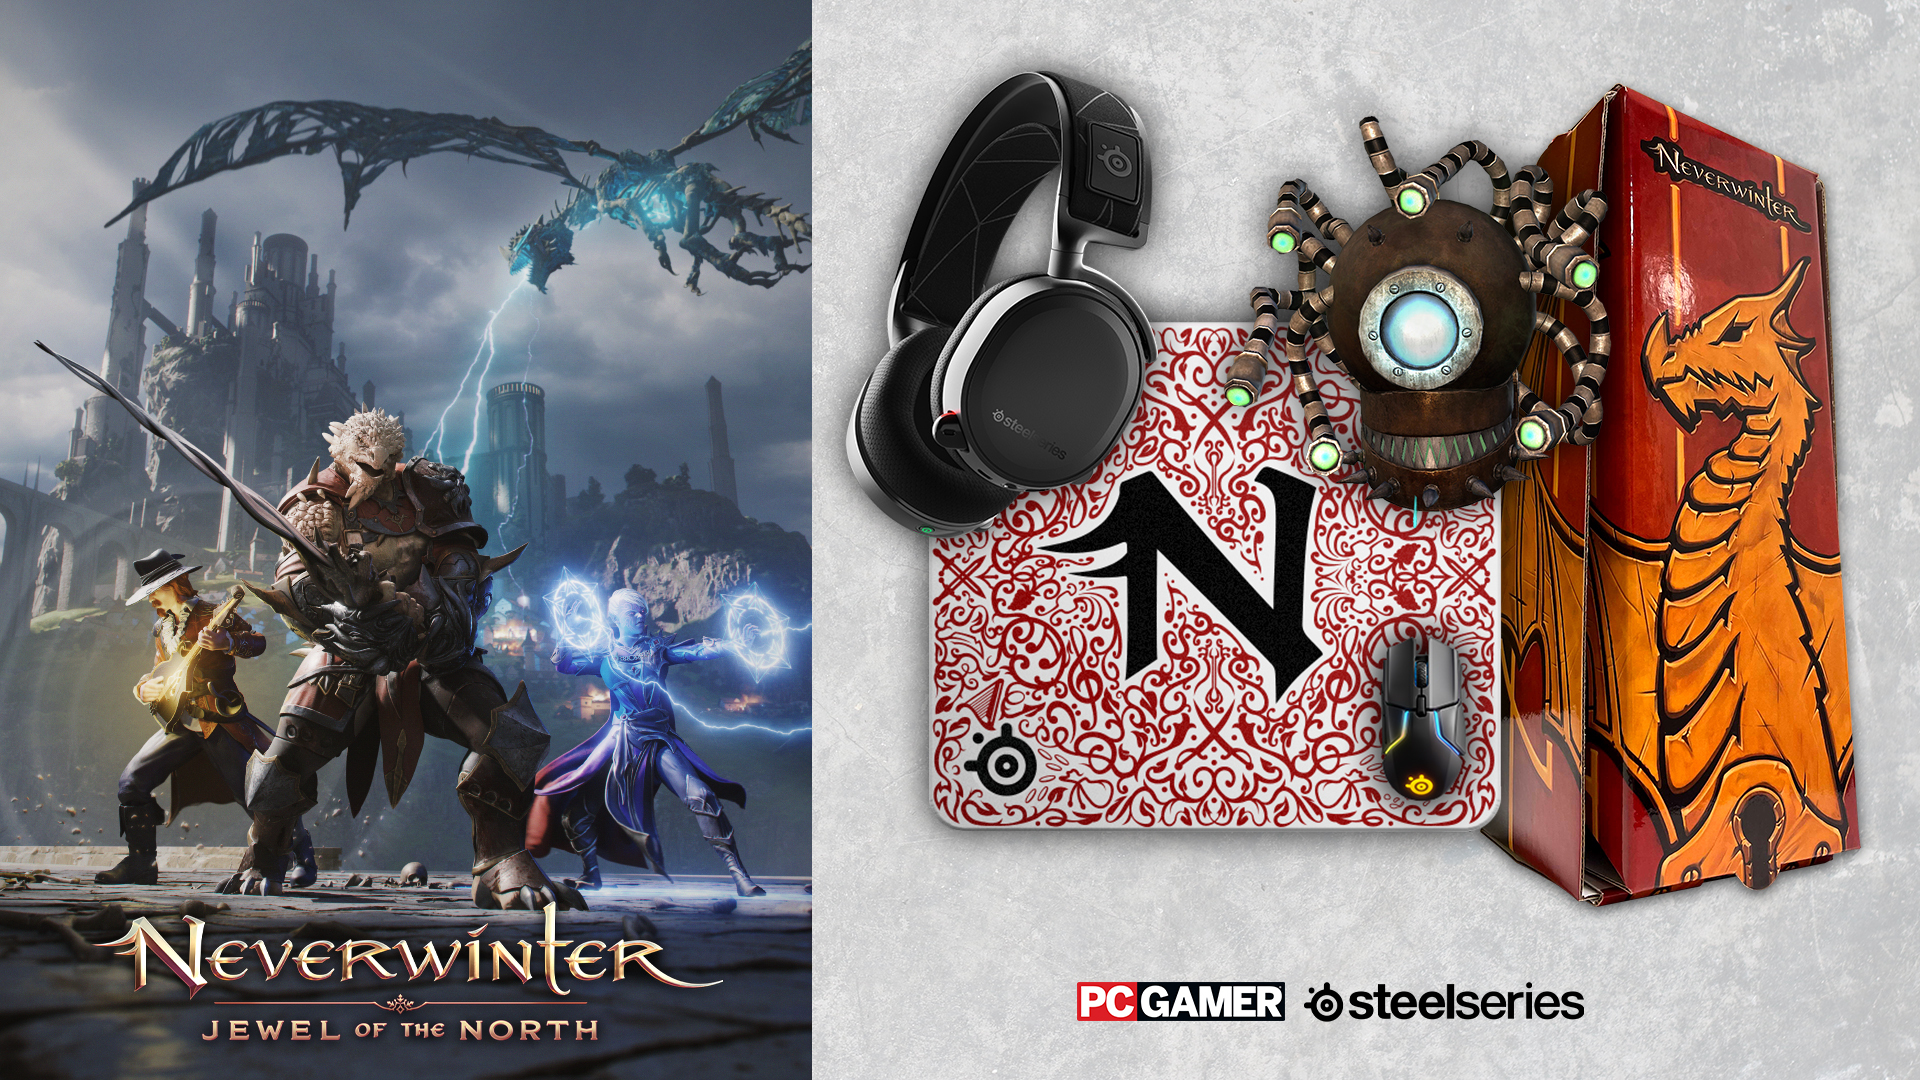 vallei Overleven vergiftigen Win this SteelSeries and Neverwinter prize pack on the PCG forums - Kaiju  Gaming